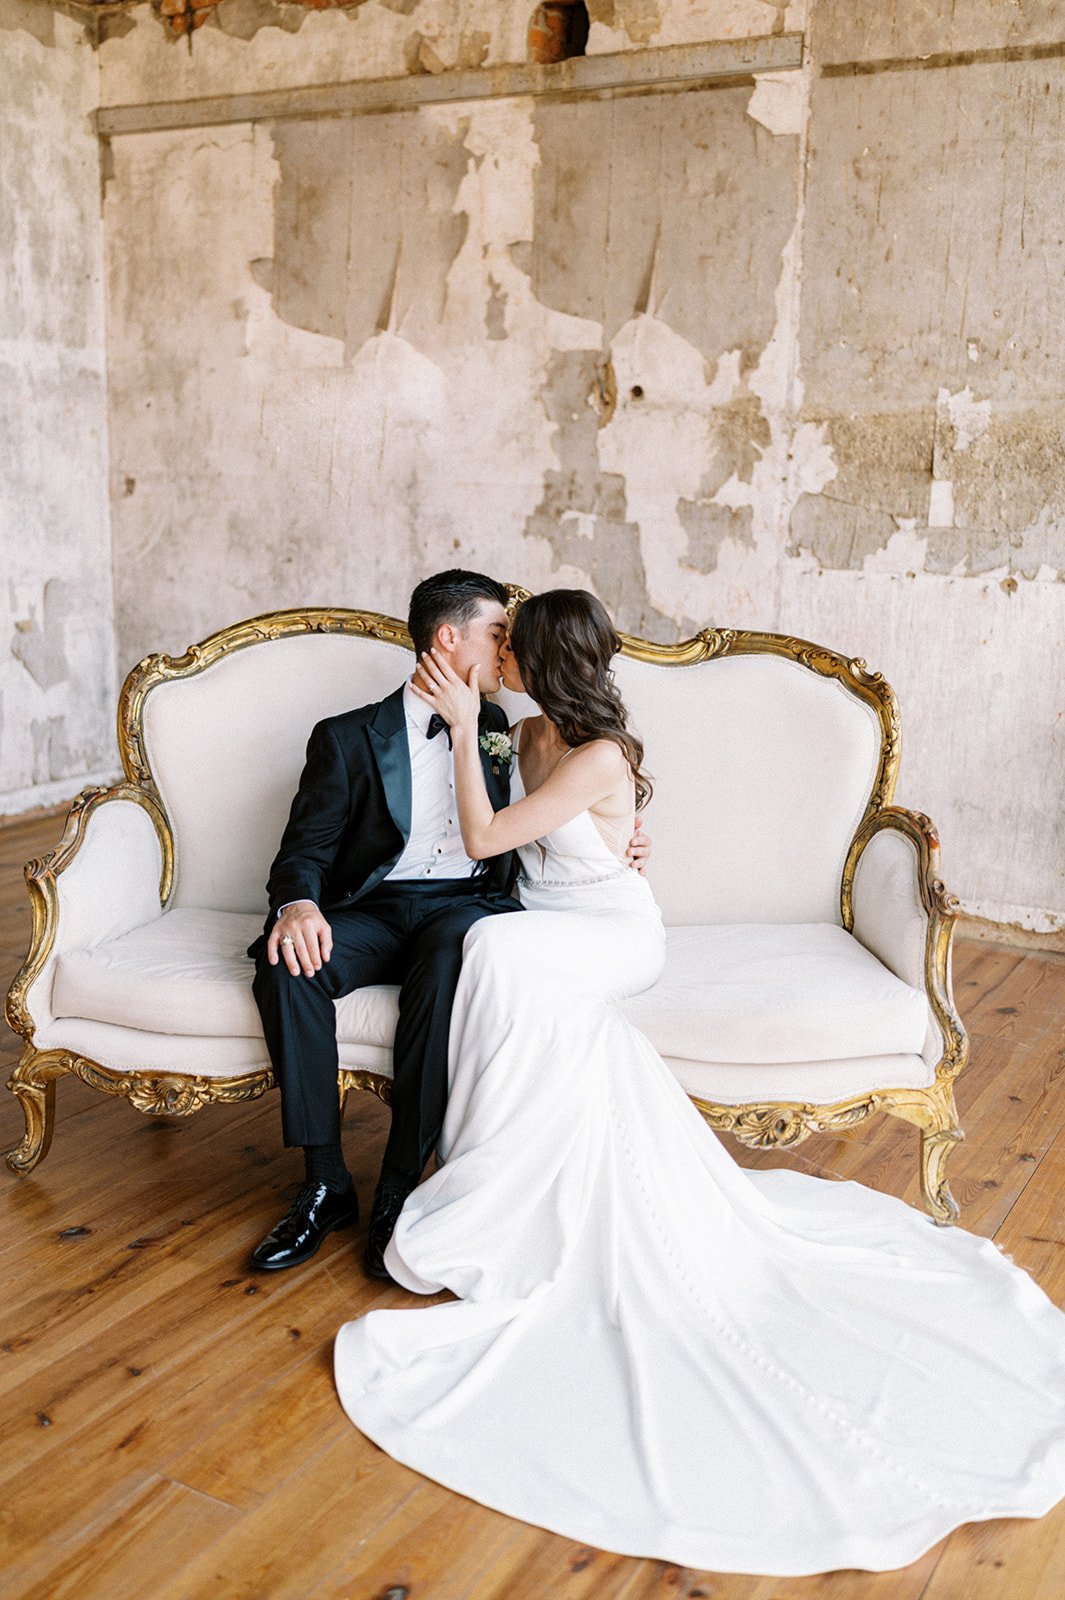 Bride and groom kissing on victorian couch in eclectic room